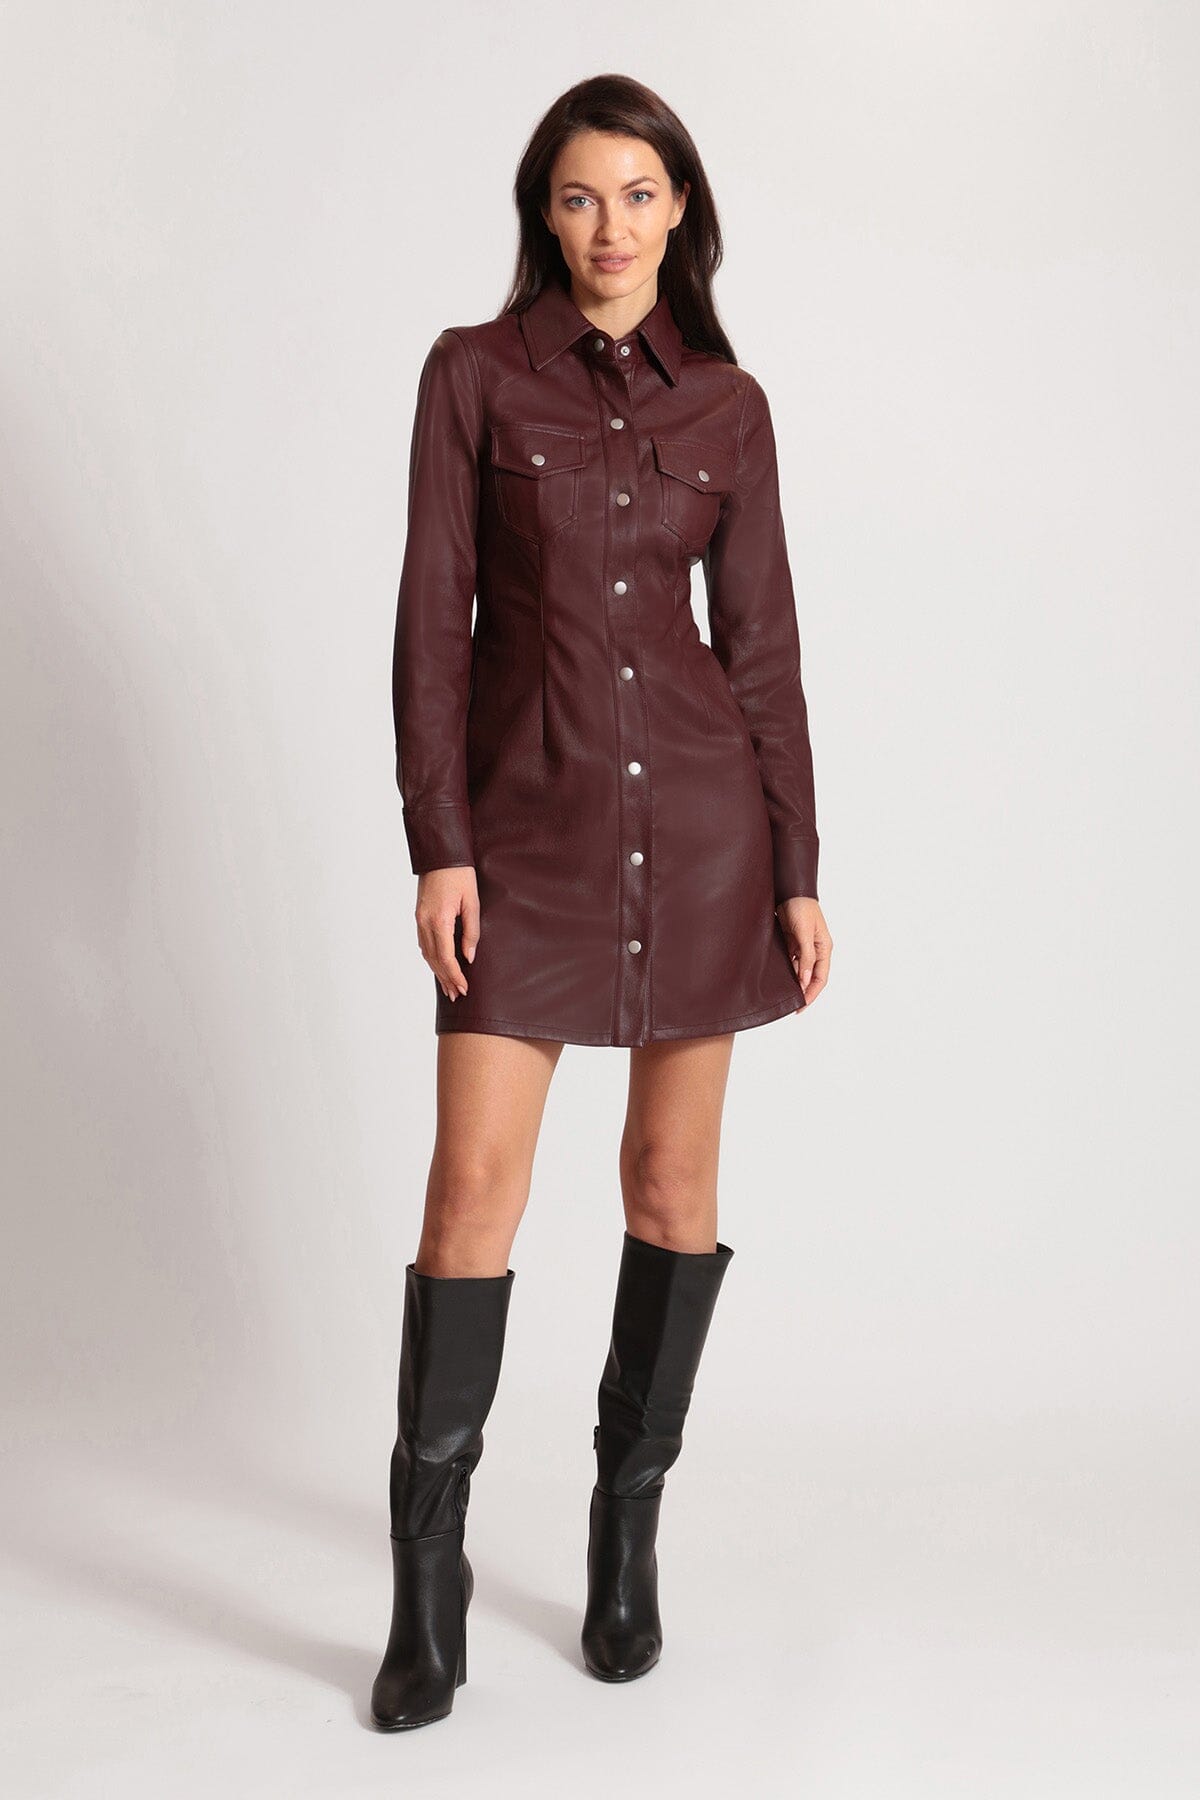 Dark red faux ever leather long sleeve shirtdress dress - figure flattering office to date night dresses for ladies